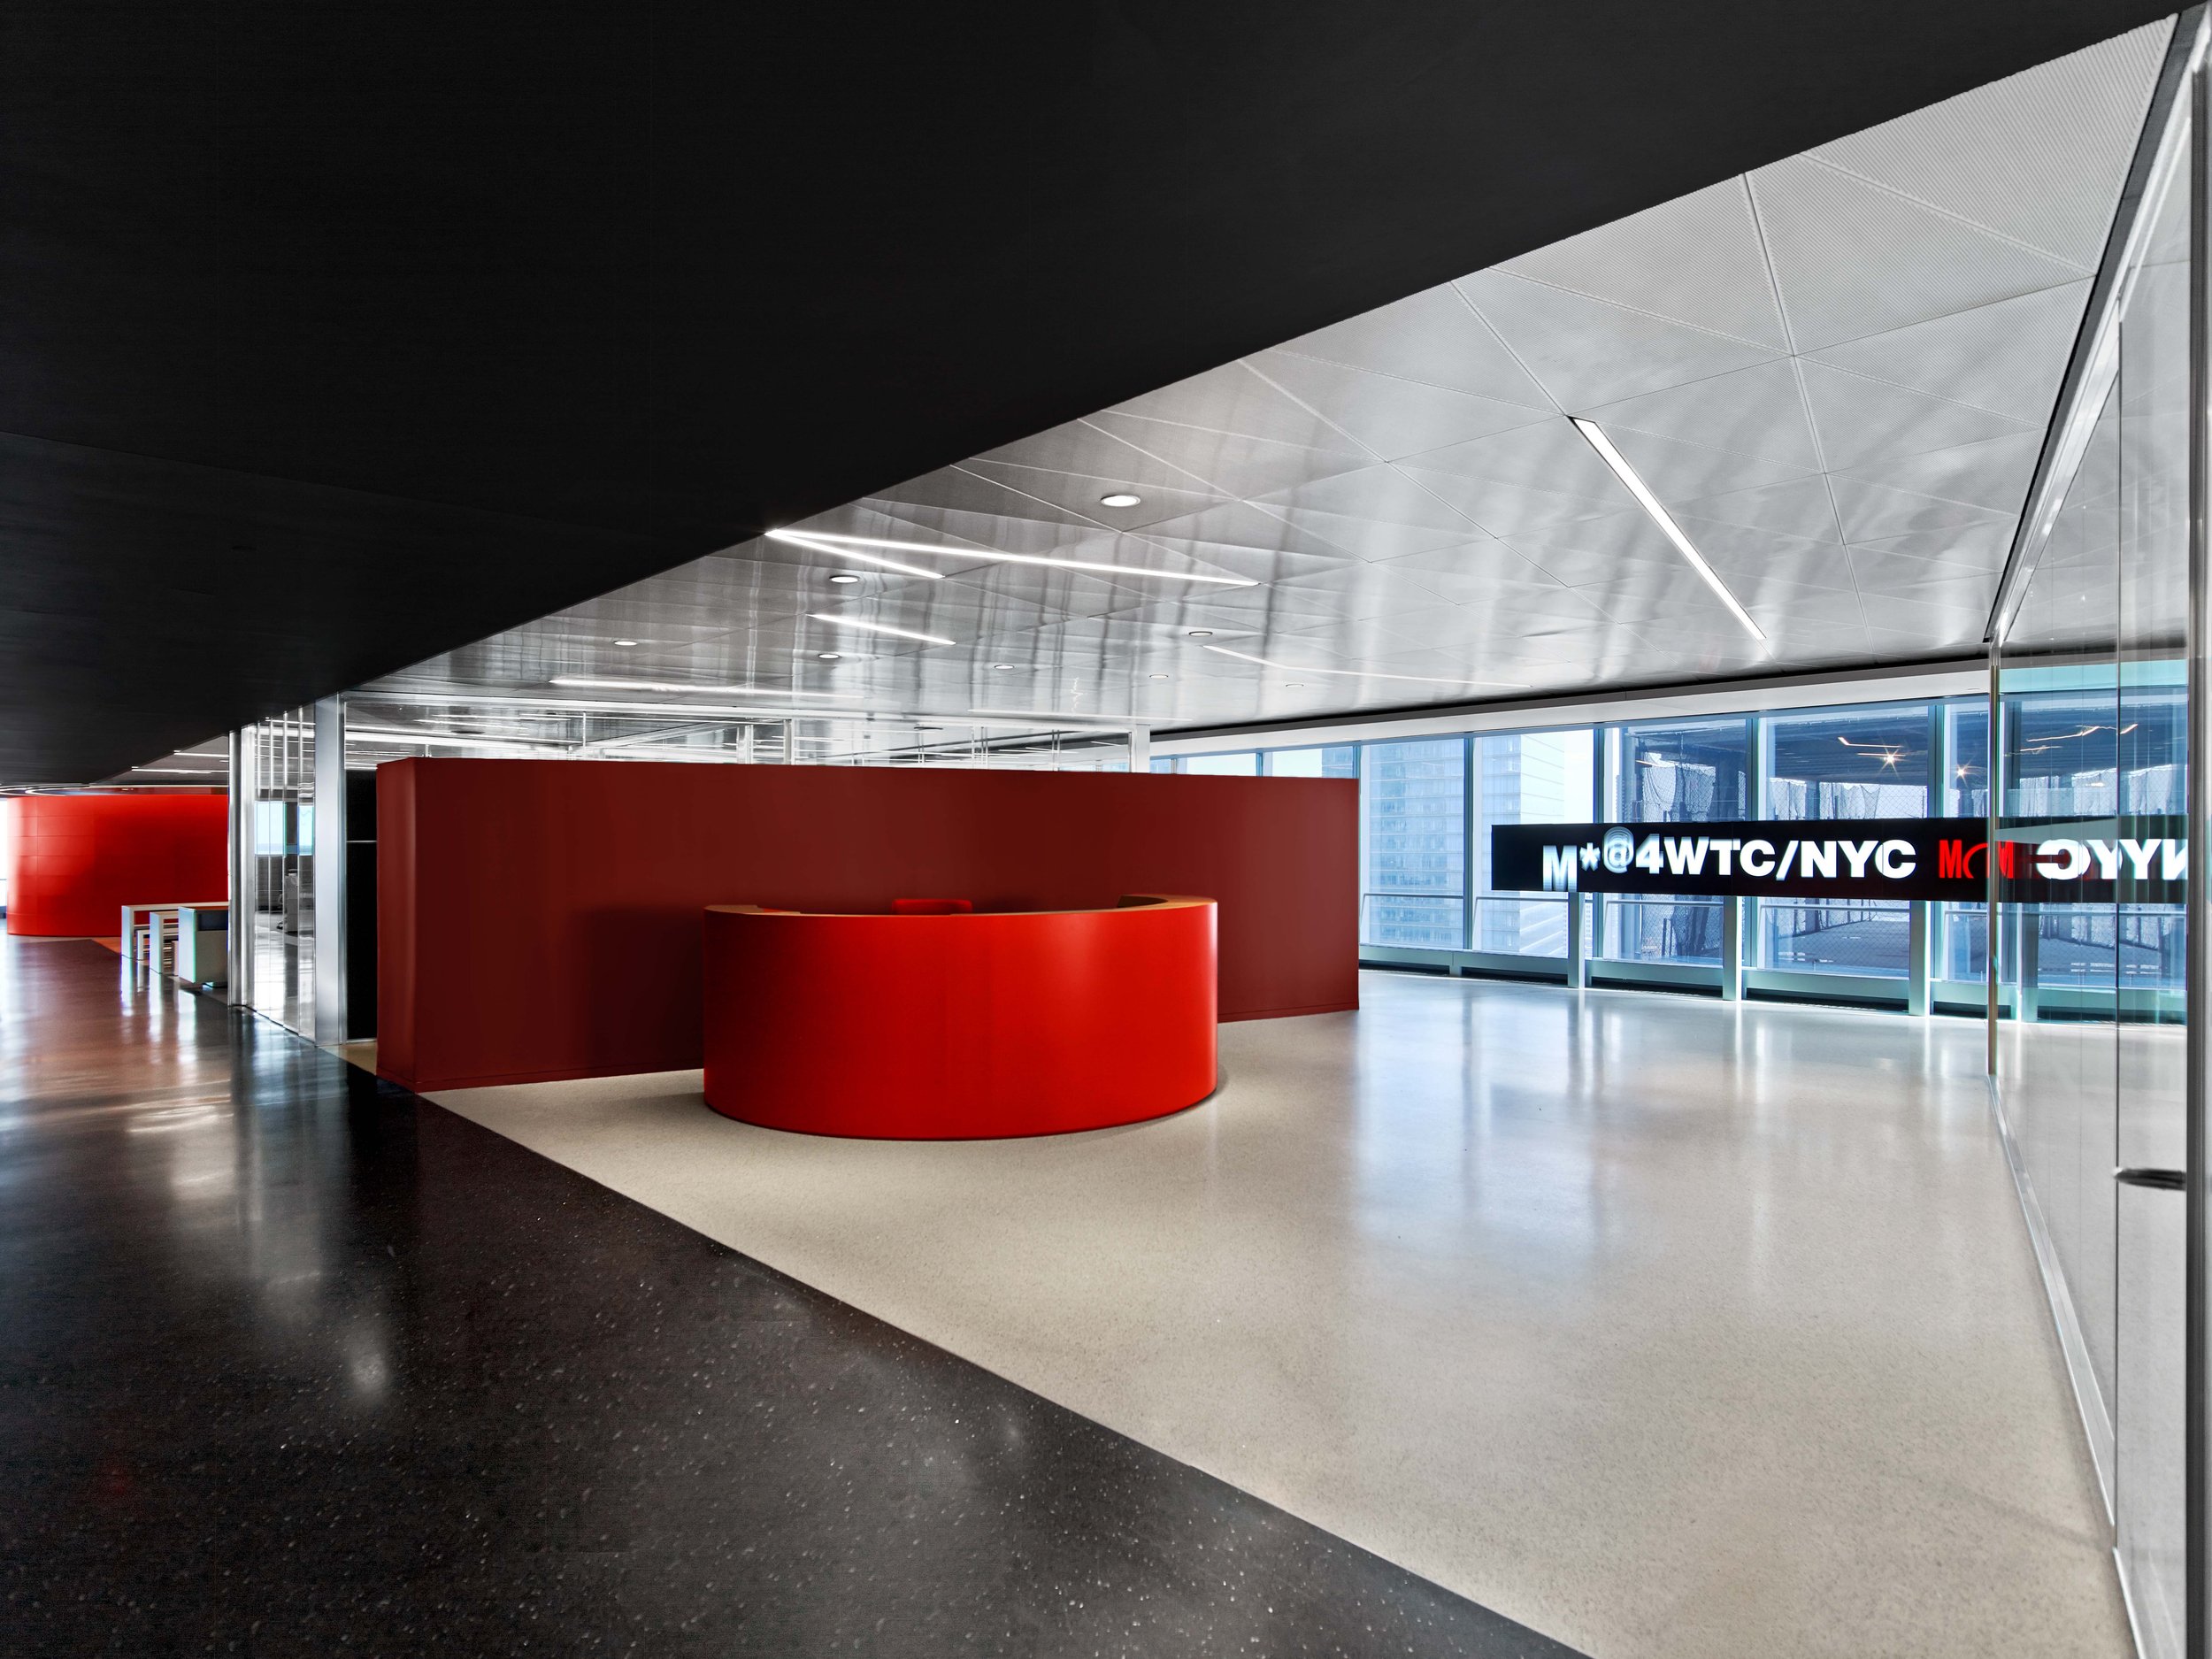 HQ, New York, 2013 - Interior programming, planning and design as well as bespoke height adjustable workstation.